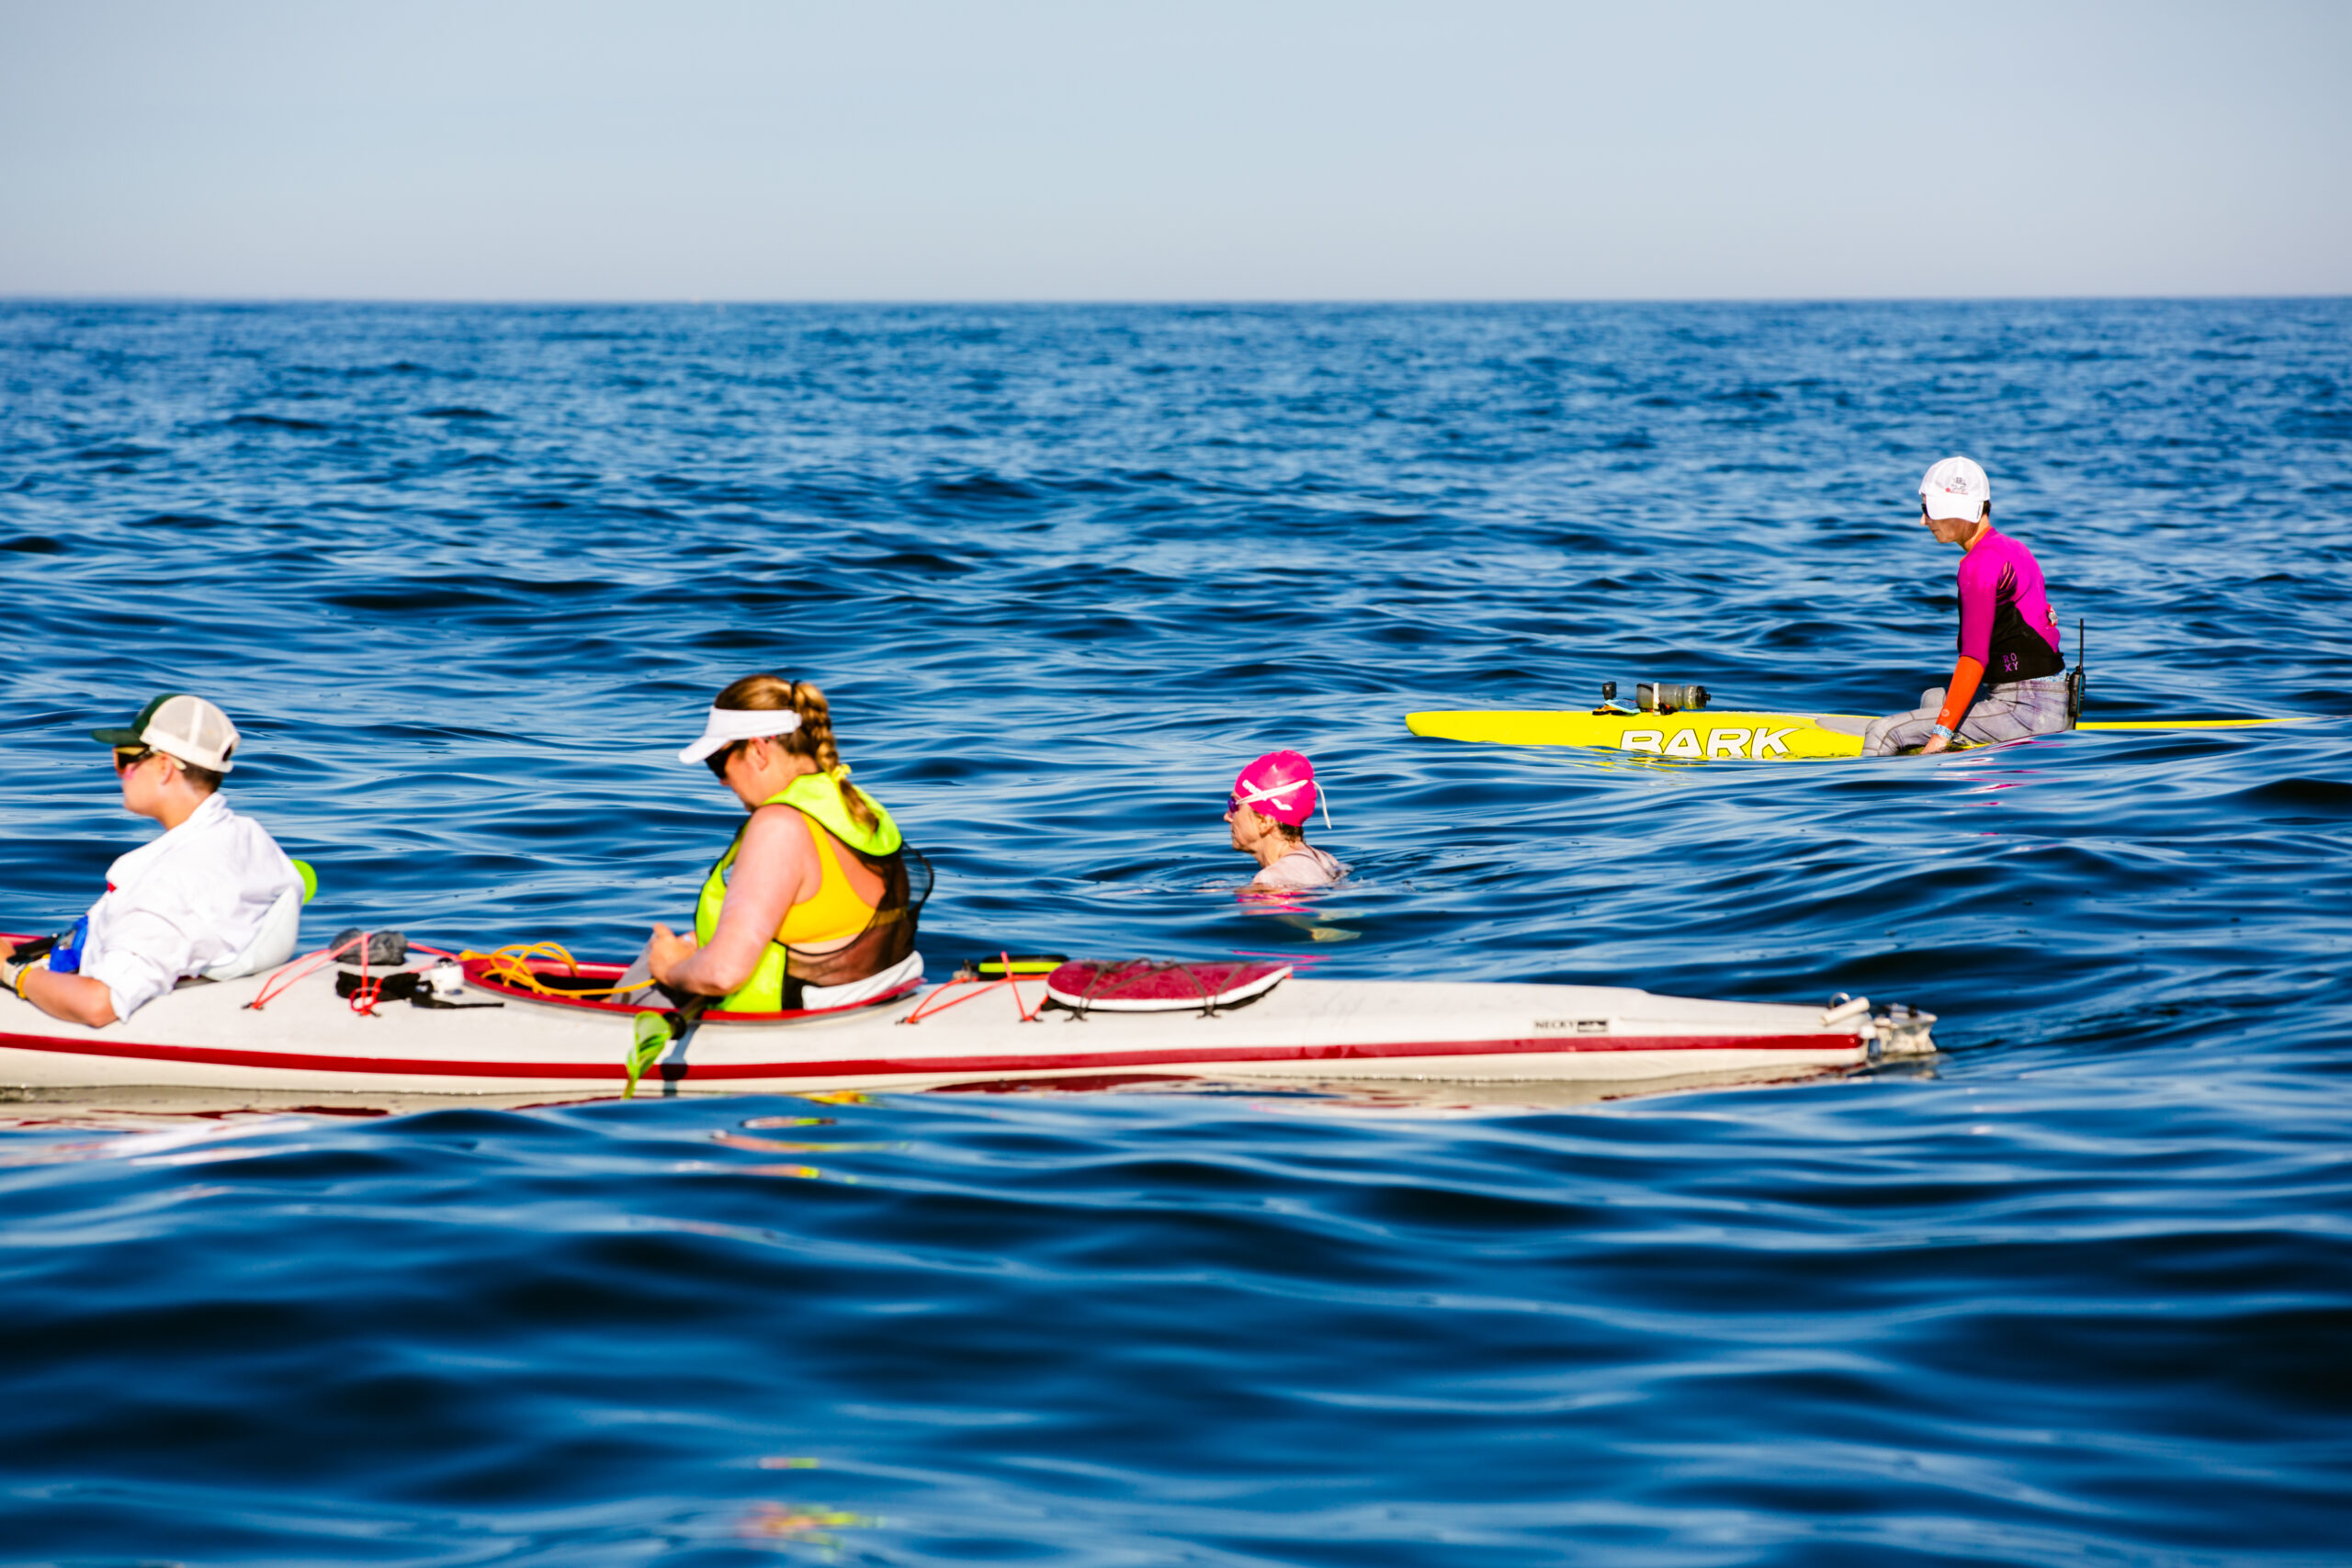 Lori King, 47, swam from Block Island to Montauk on August 3, flanked by a team of supporters on two boats, a kayak and paddle board. DREW MALONEY PHOTOS